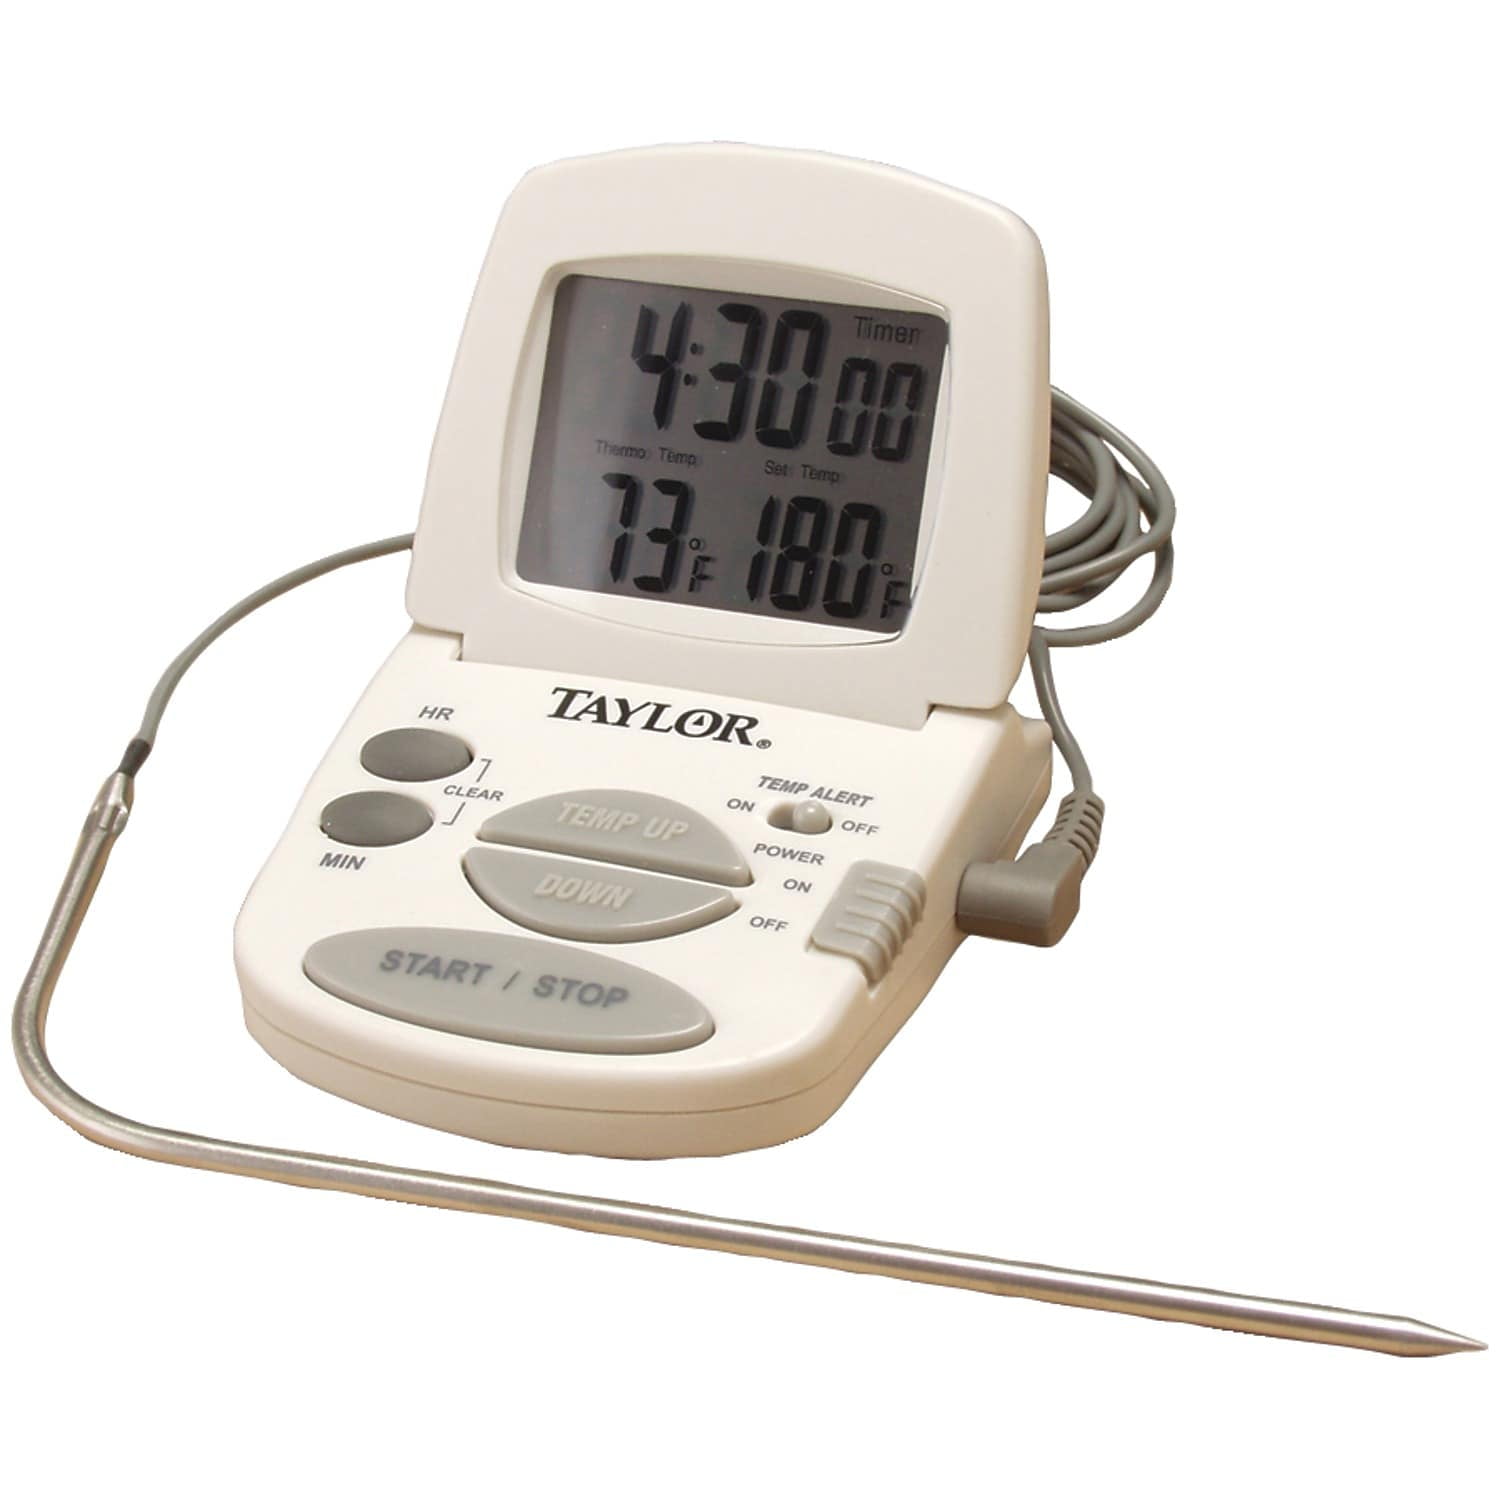 Polder 362-90 Digital In-Oven Thermometer with Timer Review